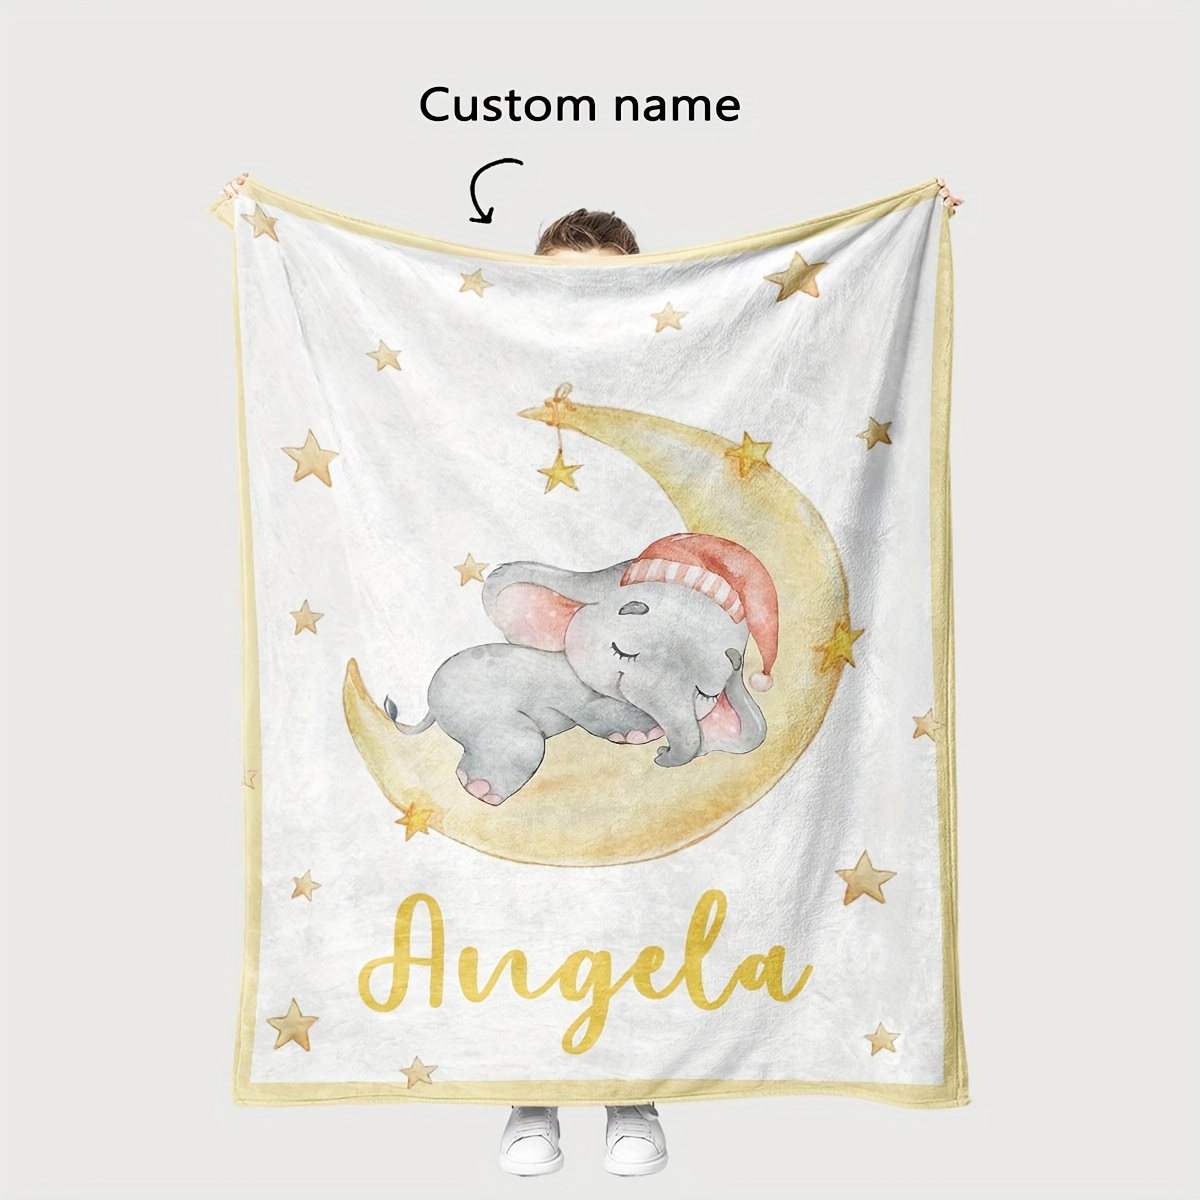 

1pc Digital Print Name Custom Blanket Elephant Sleeping On The Moon Element Flannel Blanket - Soft, Lightweight - Perfect For Travel, Home Decor And Gifts